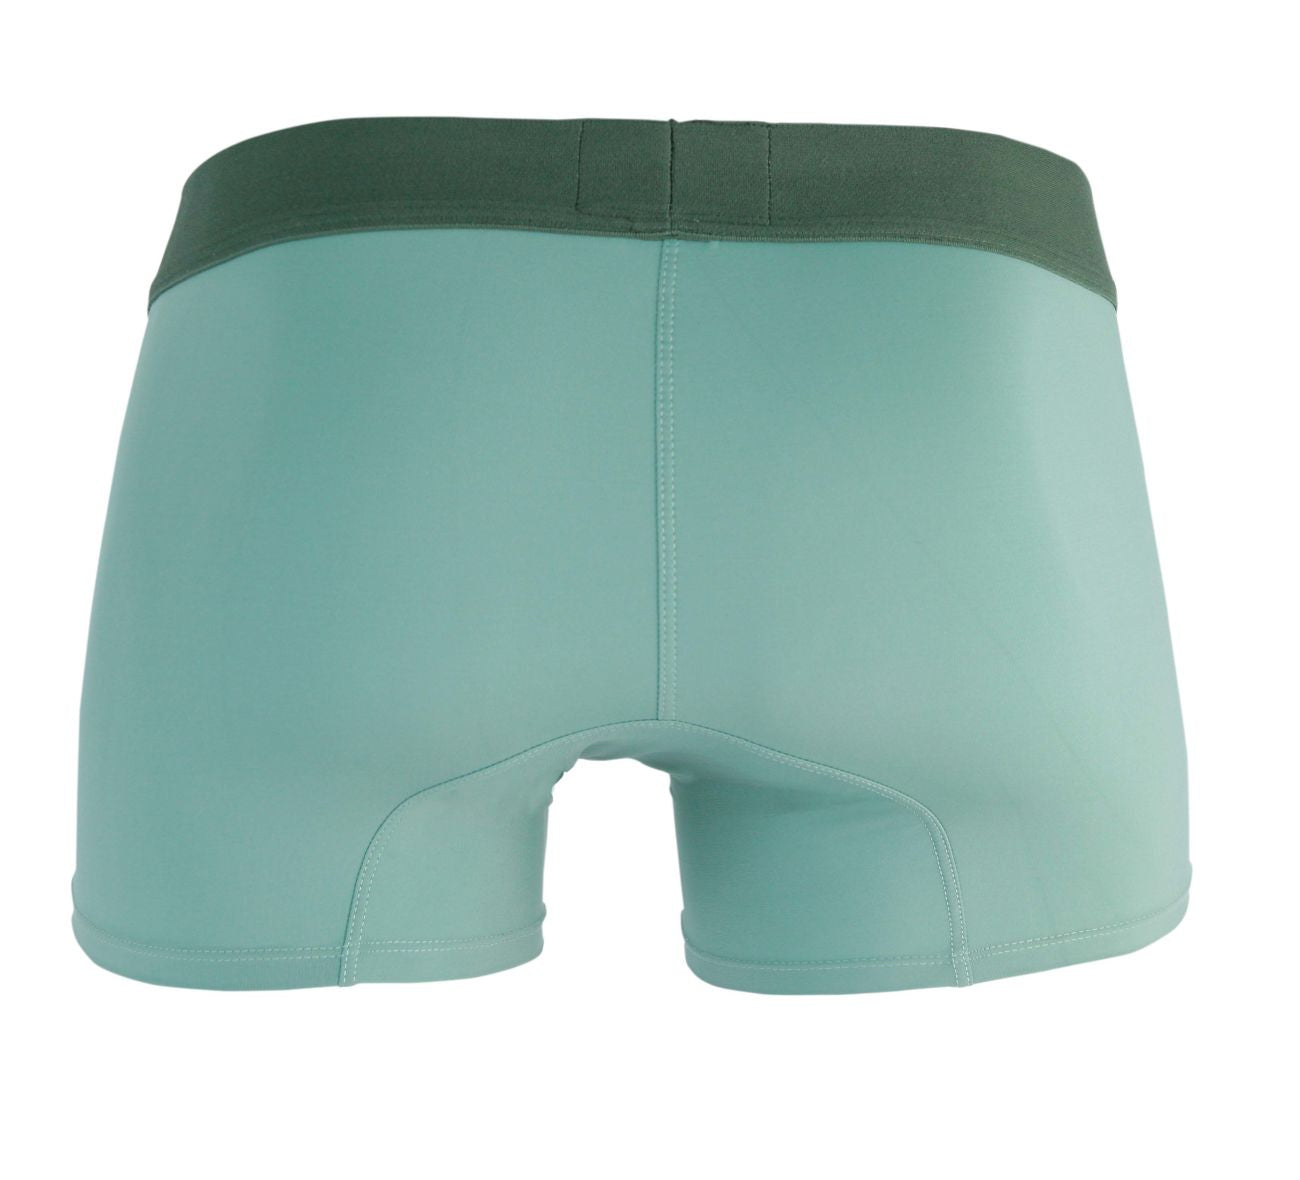 Clever 1233 Grace Trunks Green